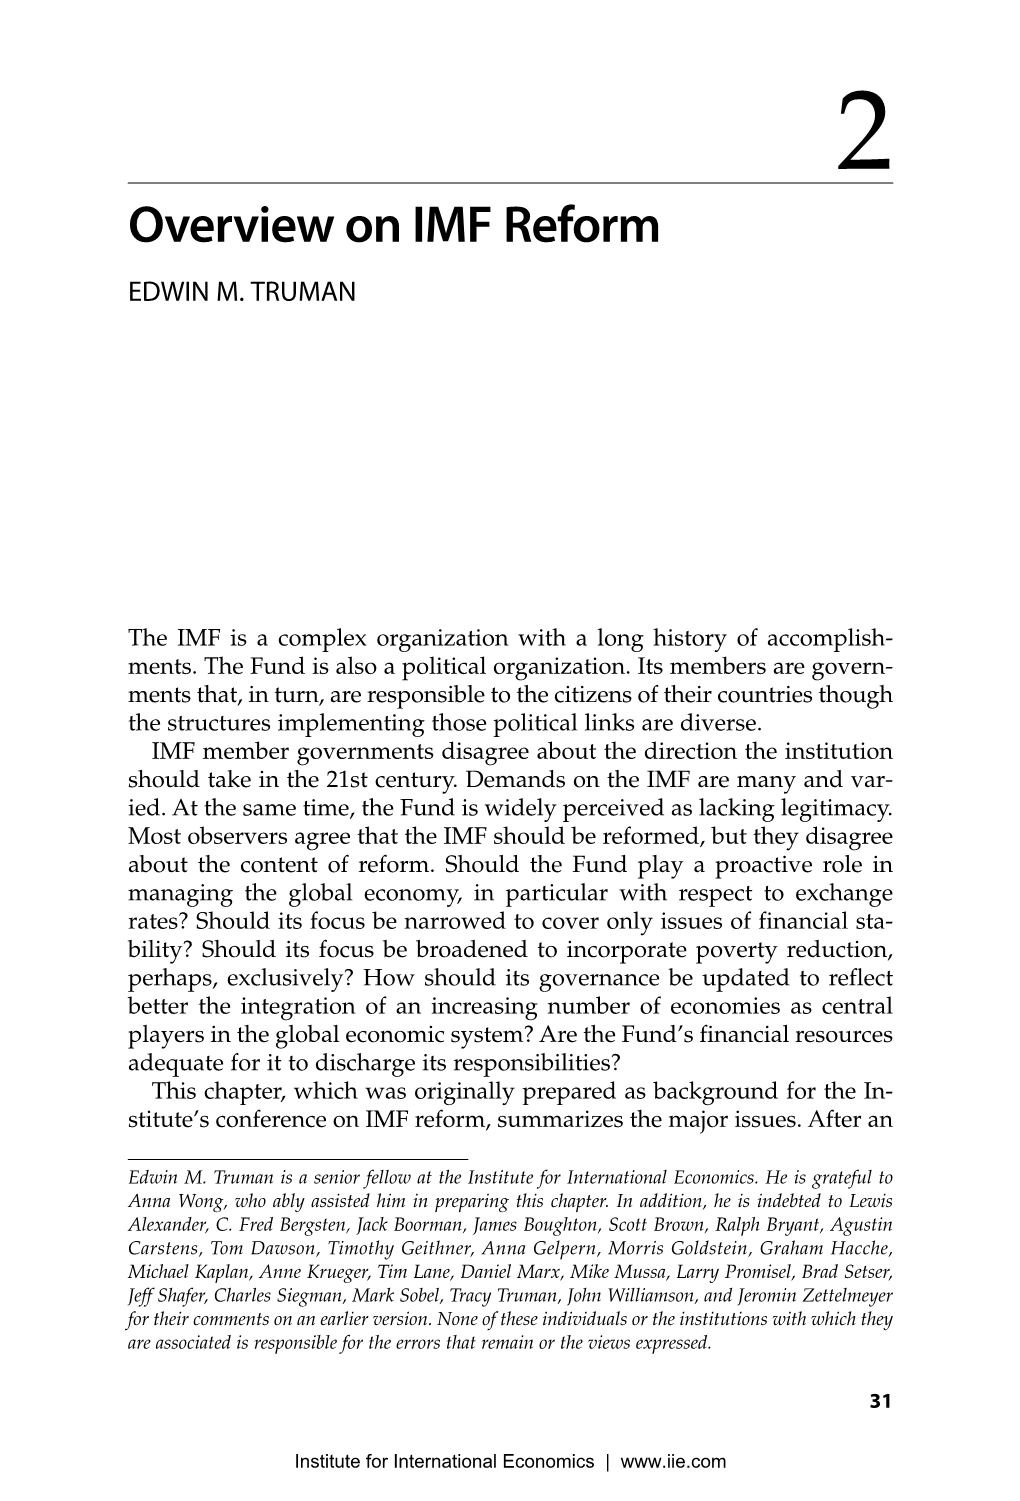 Reforming the IMF for the 21St Century: Preview Chapter 2